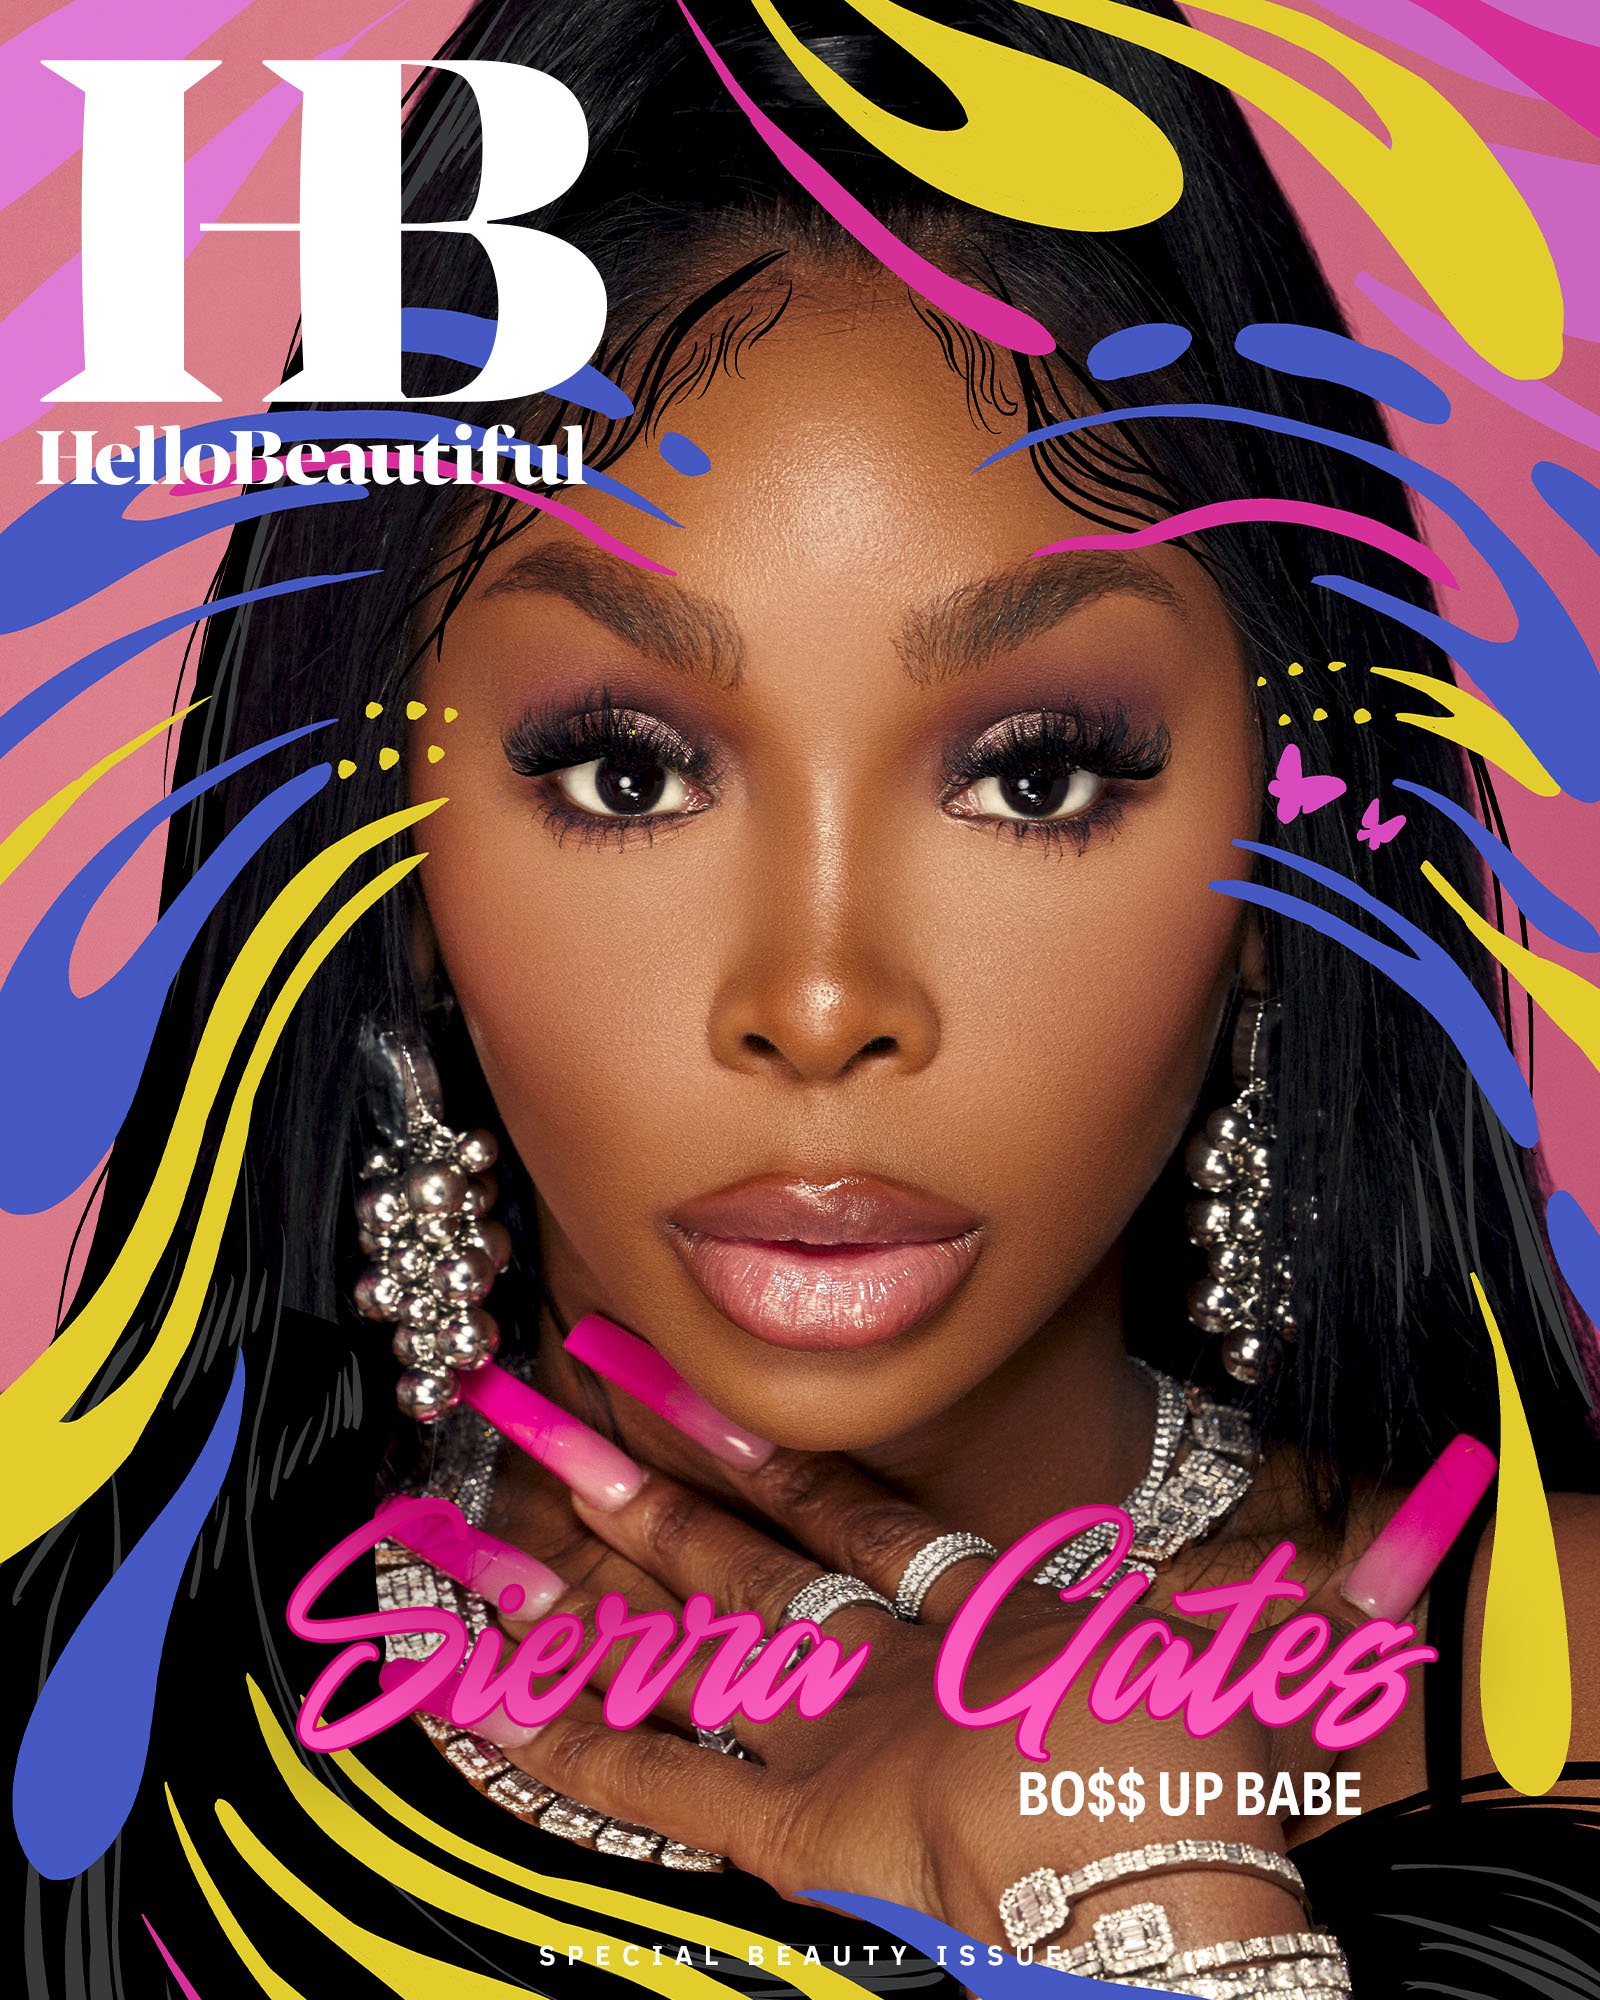 Sierra Gates Expands Her Beauty Empire, Launches The Bo$$ Up Babe Palette